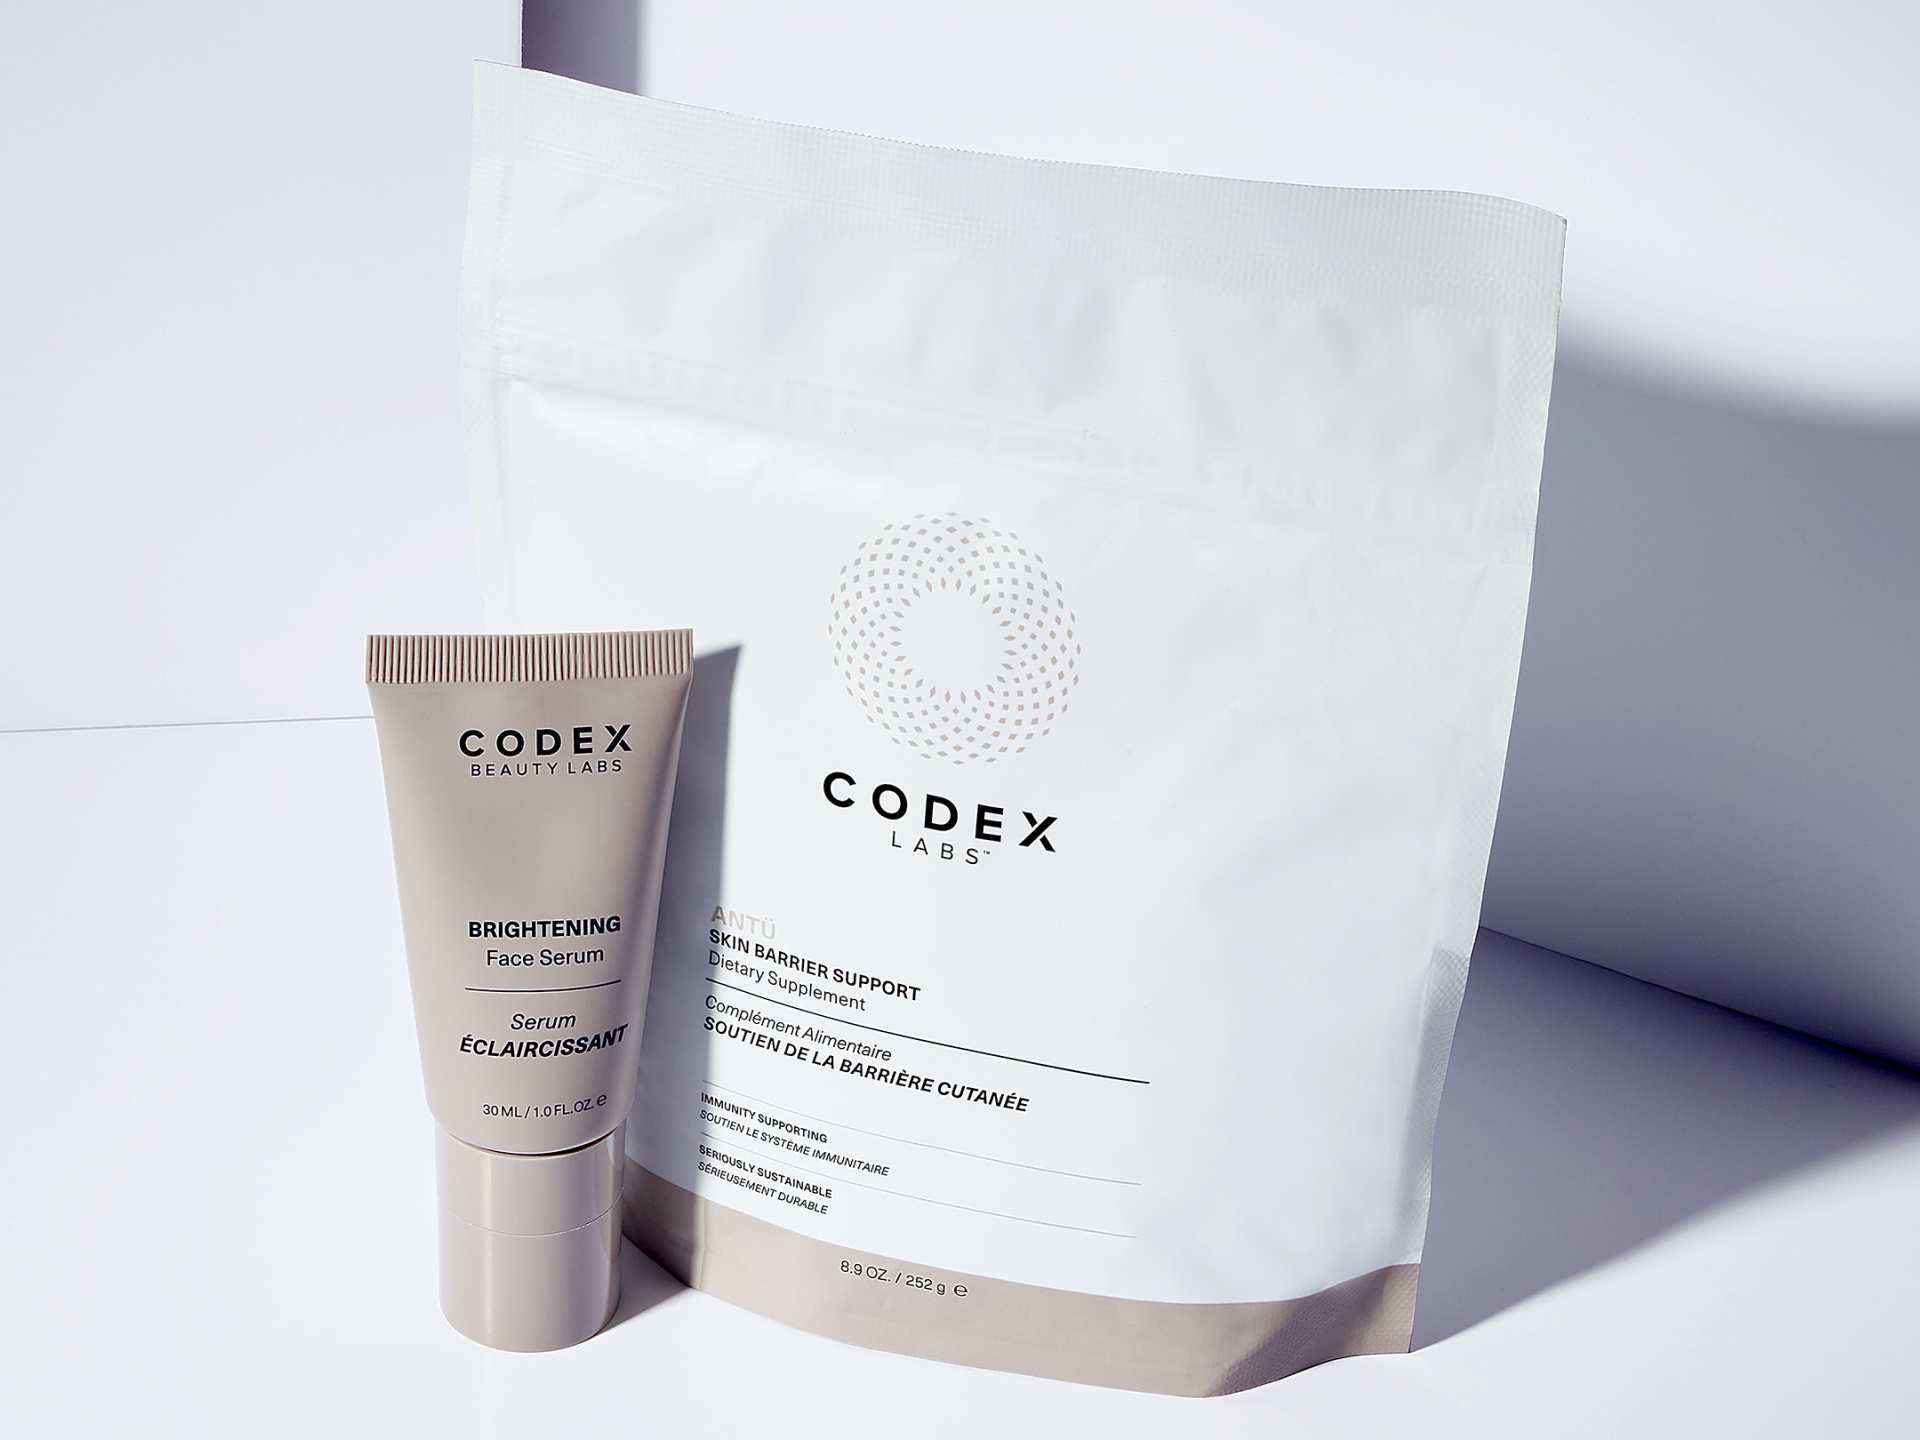 Codex Labs Brightening Face Serum and Skin Barrier Support